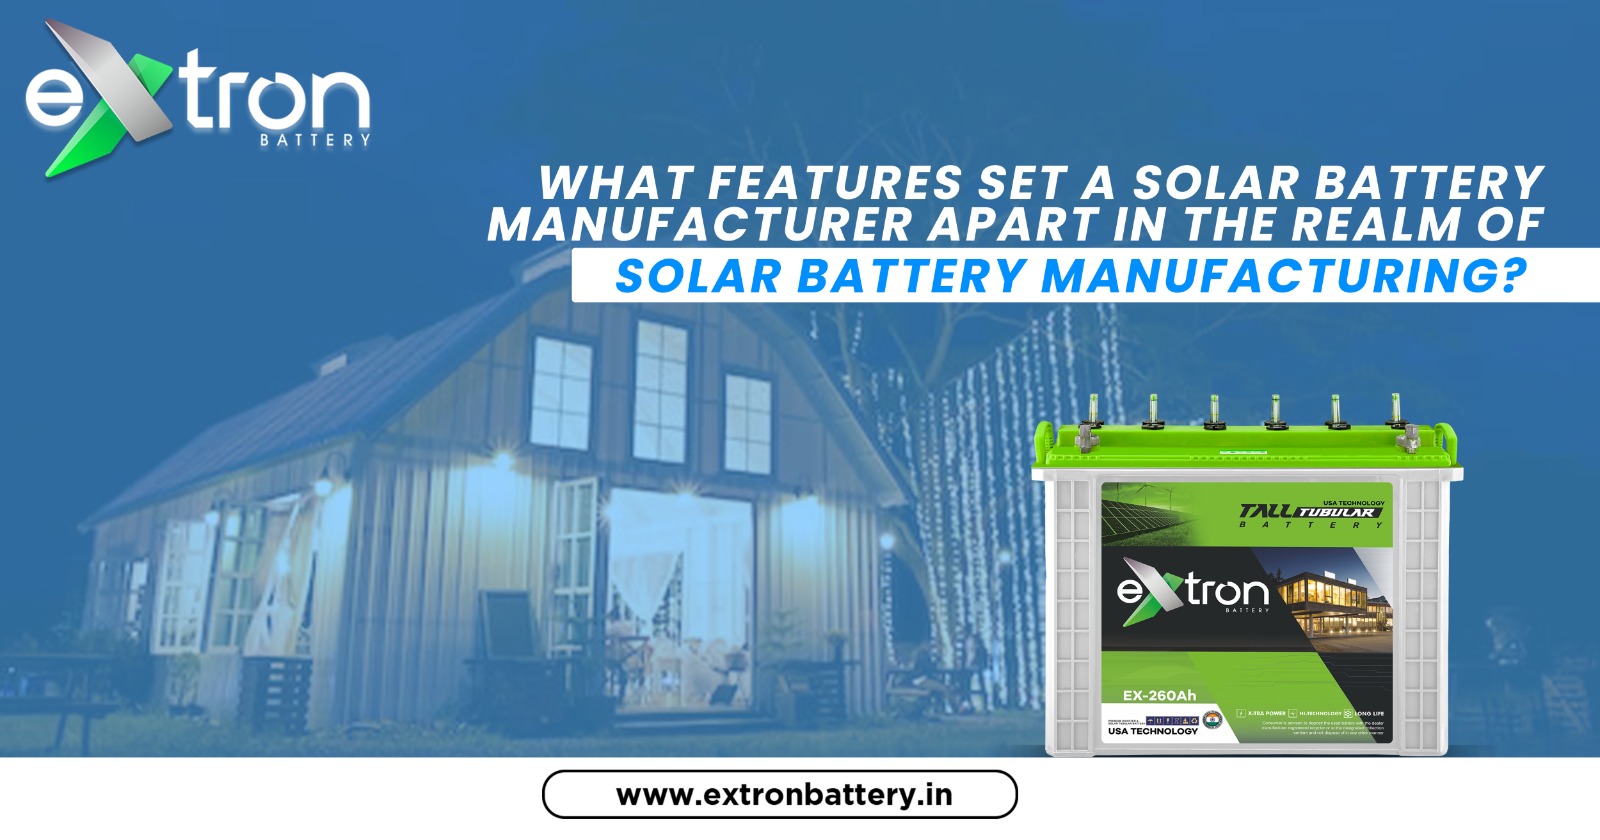 What features set a Solar Battery Manufacturer Apart in the Realm of Solar Battery Manufacturing?